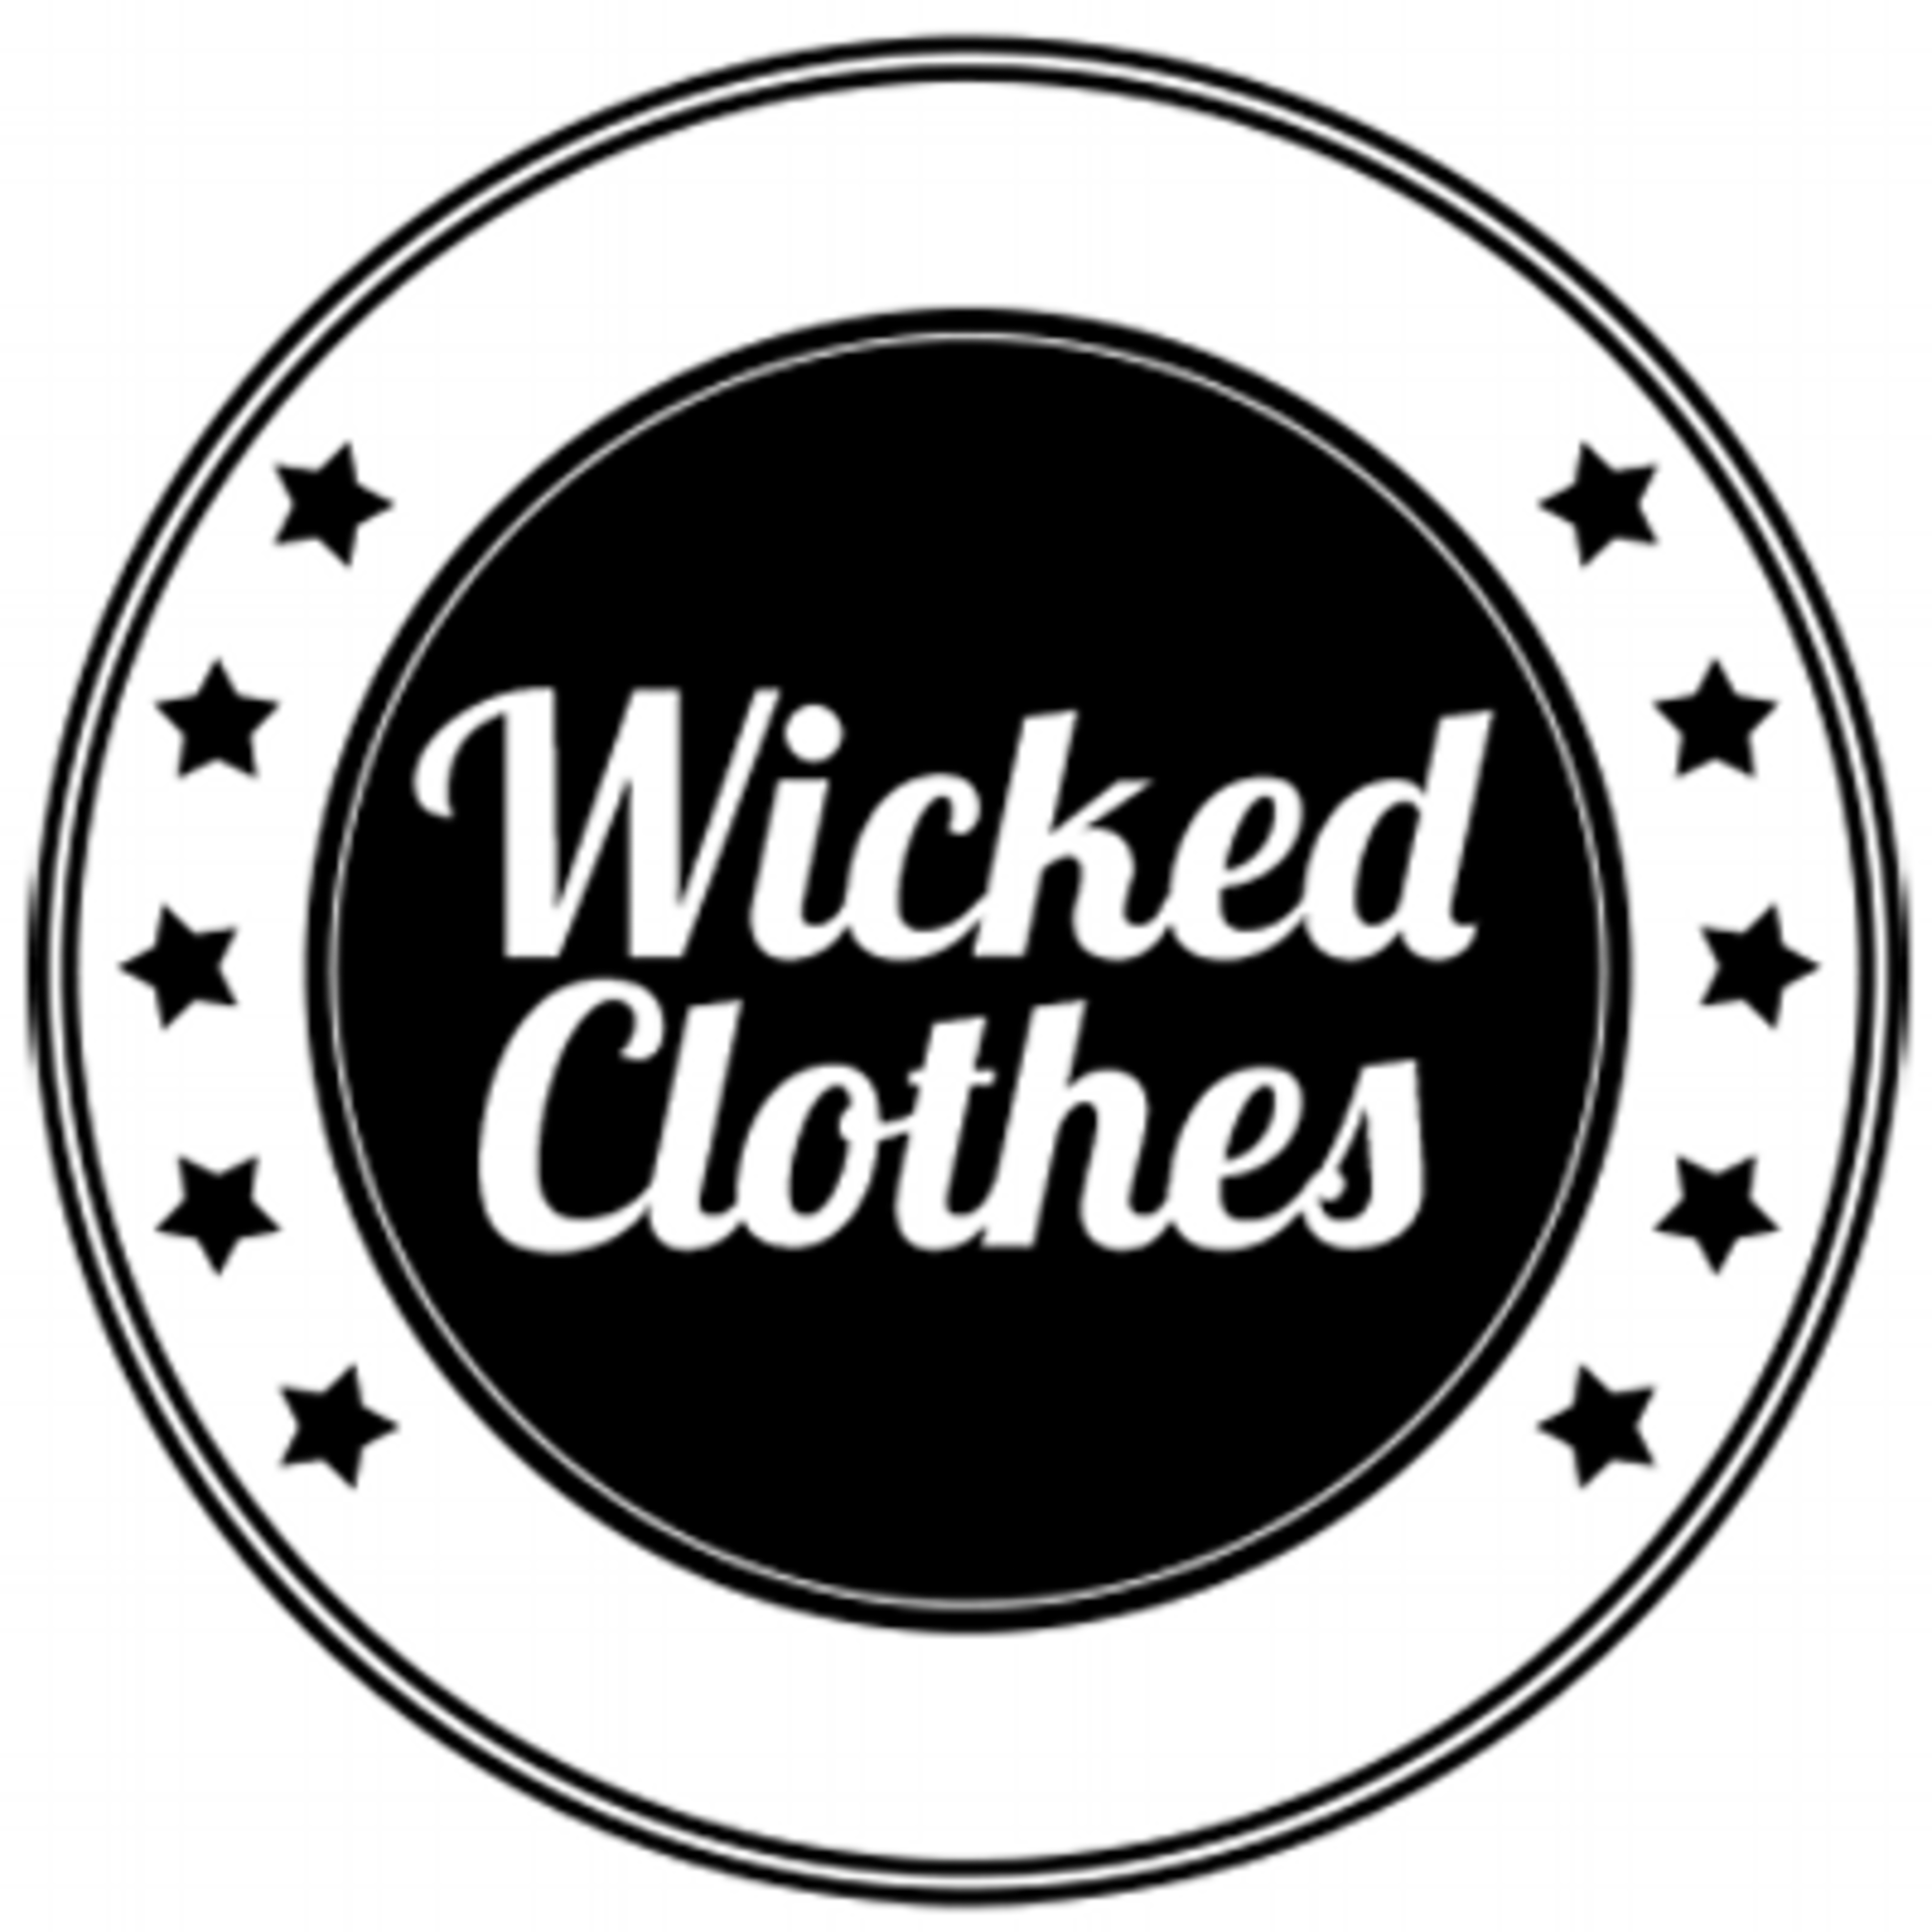 Wicked Clothes Code